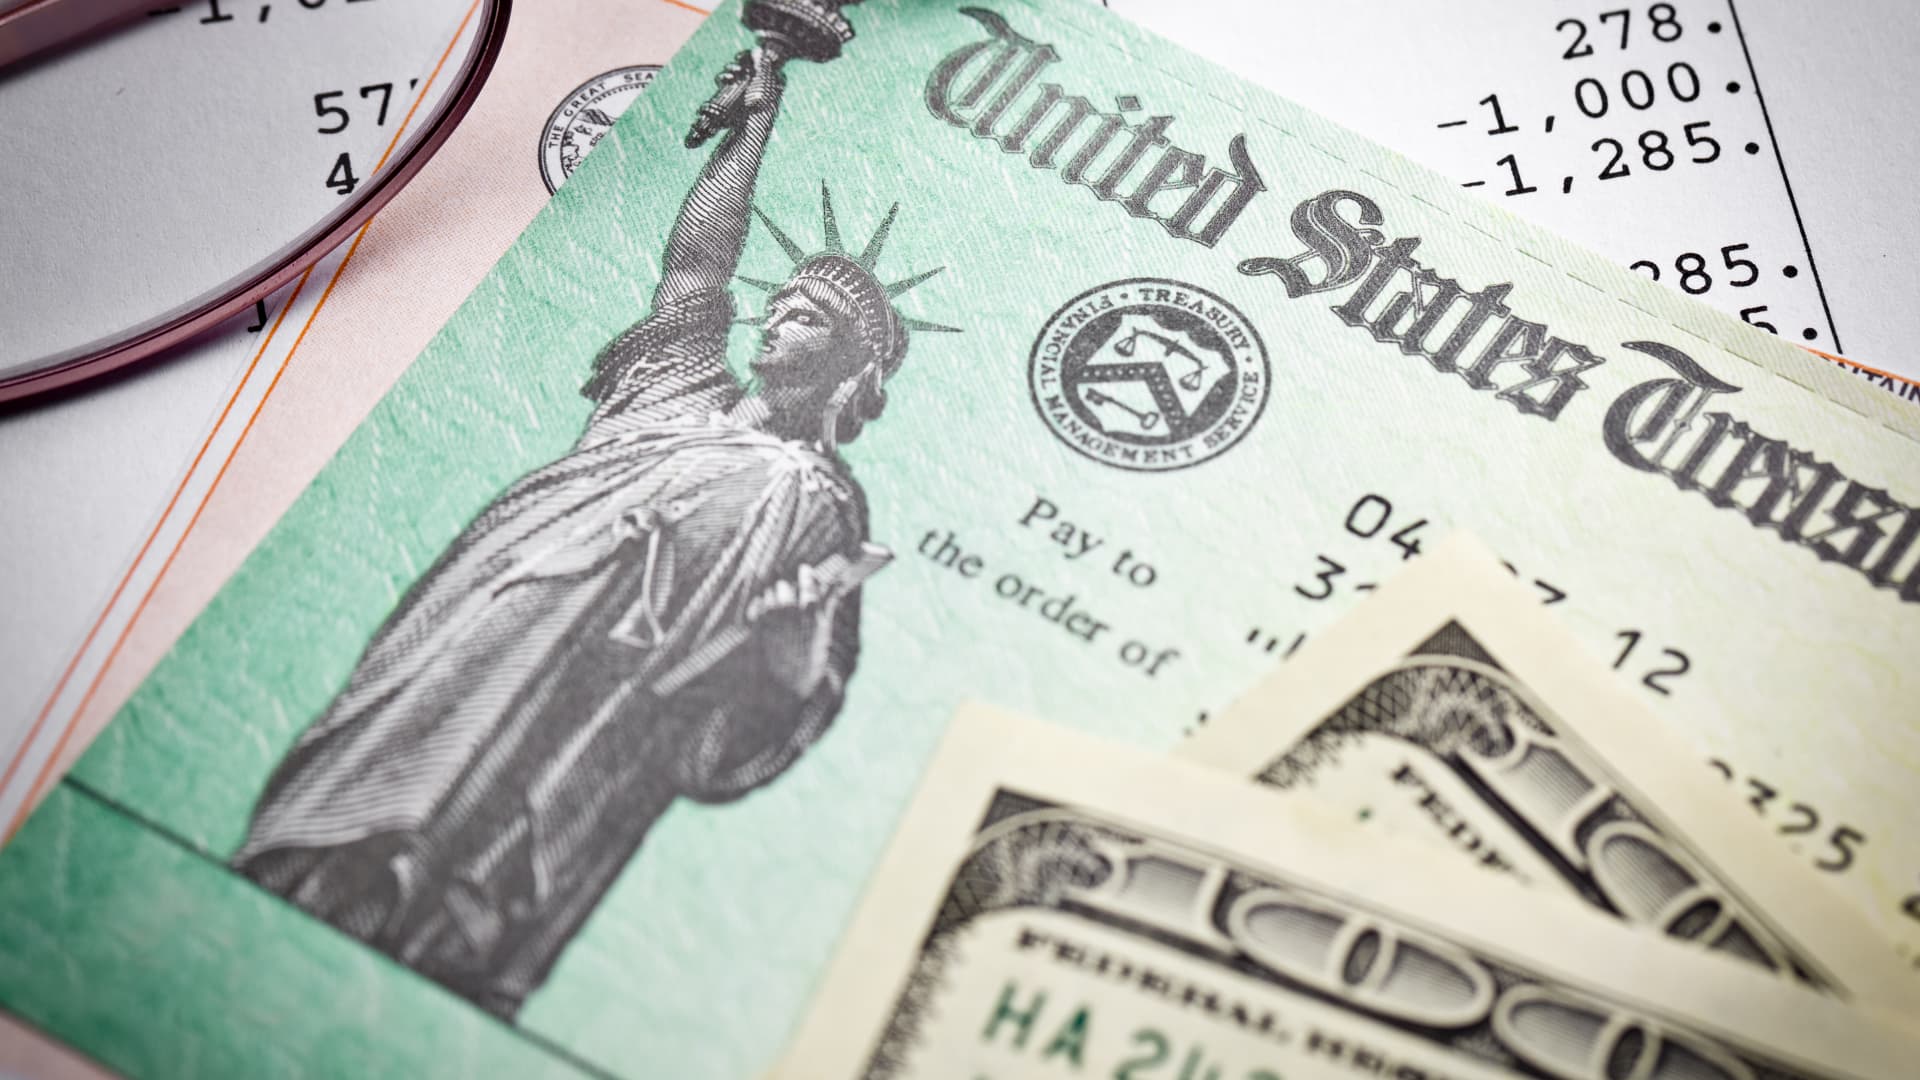 Still missing your tax refund? You’ll soon receive 5% interest — but it’s taxable